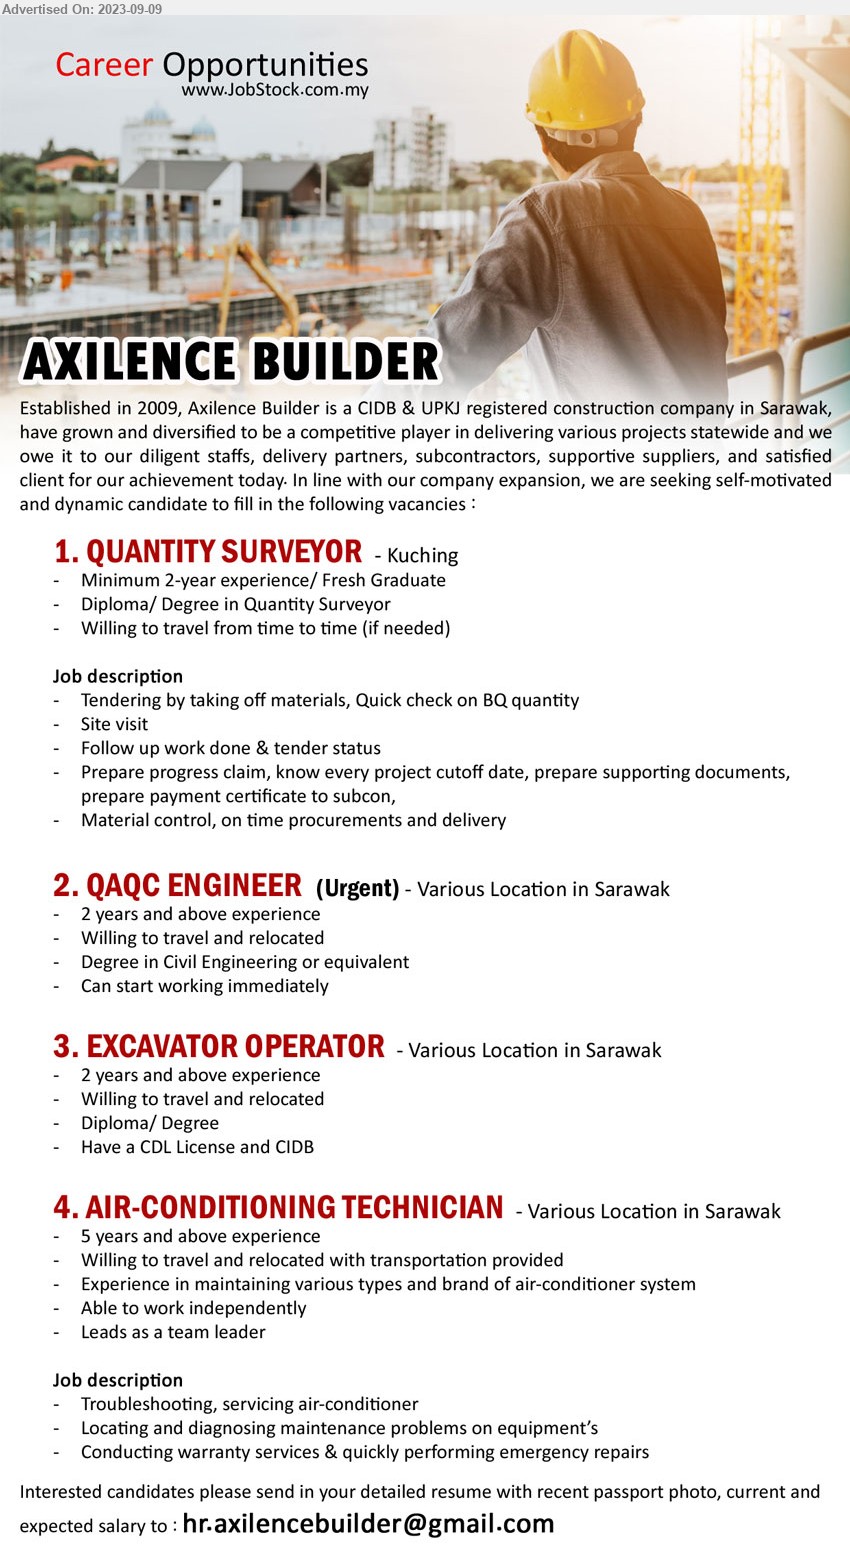 AXILENCE BUILDER - 1. QUANTITY SURVEYOR (Kuching), Diploma/ Degree in Quantity Surveyor, Minimum 2-year experience/ Fresh Graduate,...
2. QAQC ENGINEER (Various Location in Sarawak), Degree in Civil Engineering, 2 yrs. exp.,...
3. EXCAVATOR OPERATOR (Various Location in Sarawak), Have a CDL License and CIDB ,...
4. AIR-CONDITIONING TECHNICIAN (Various Location in Sarawak), Experience in maintaining various types and brand of air-conditioner system,...
Email resume to ...